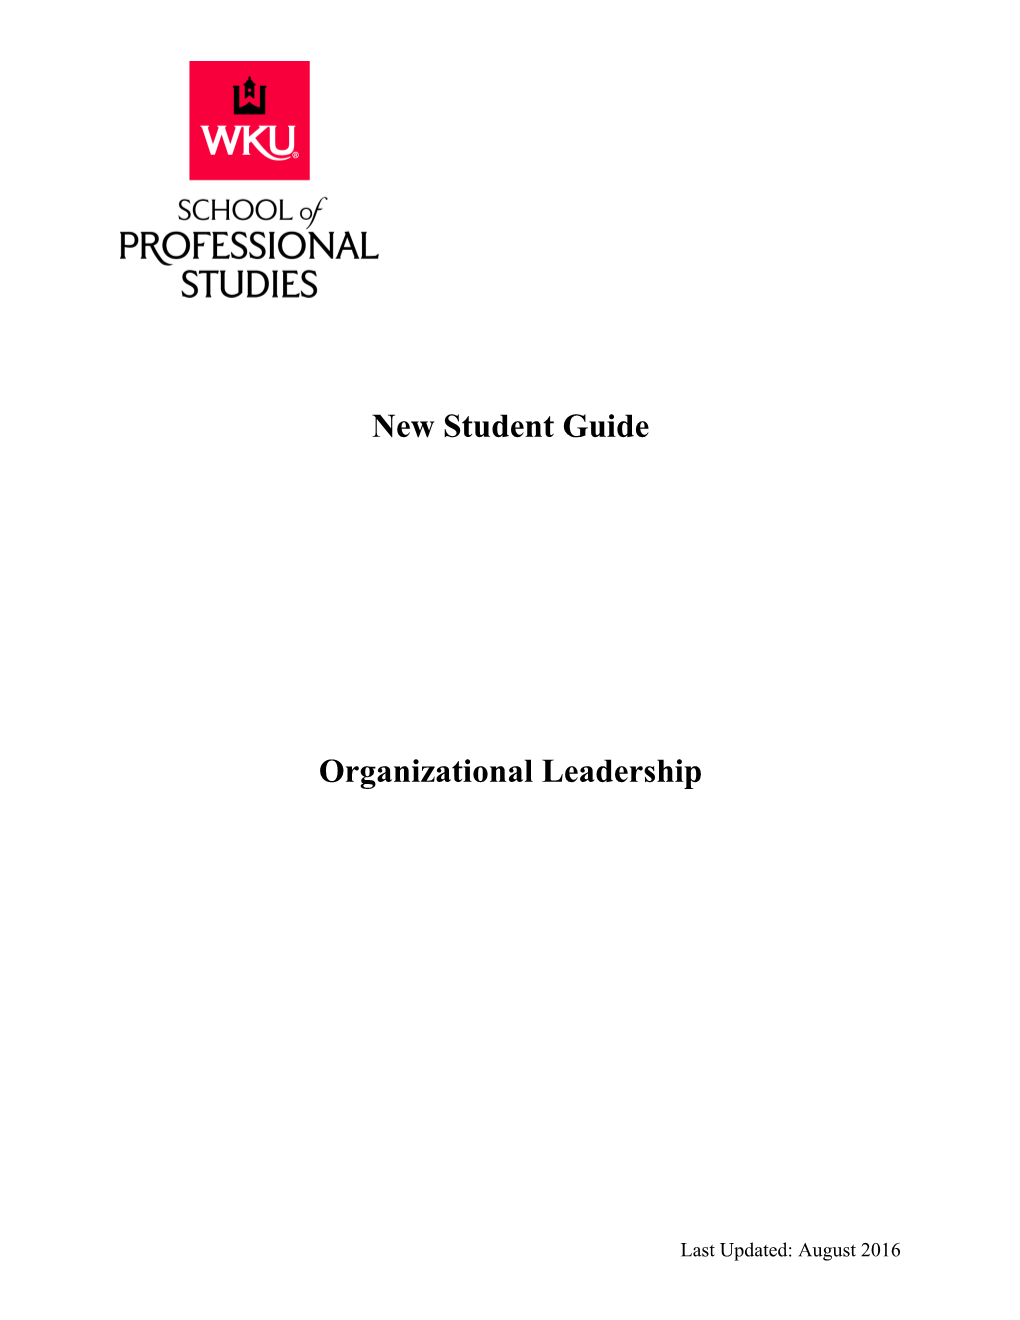 New Student Guide - OL